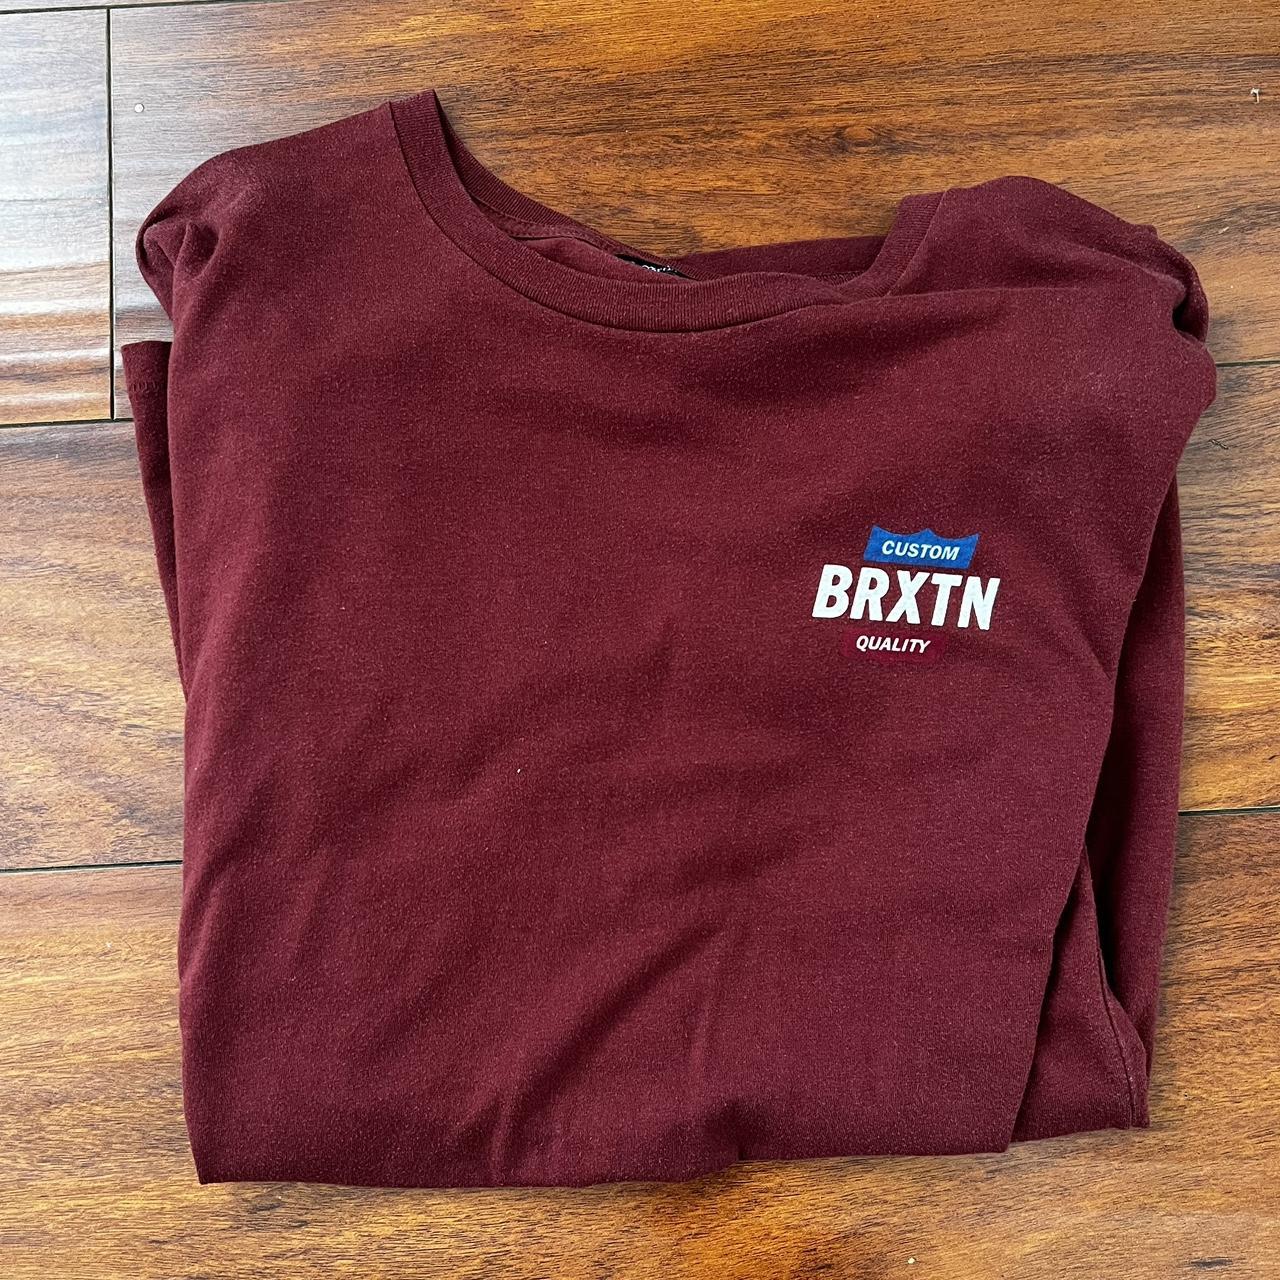 Brixton Men's Burgundy and Red T-shirt